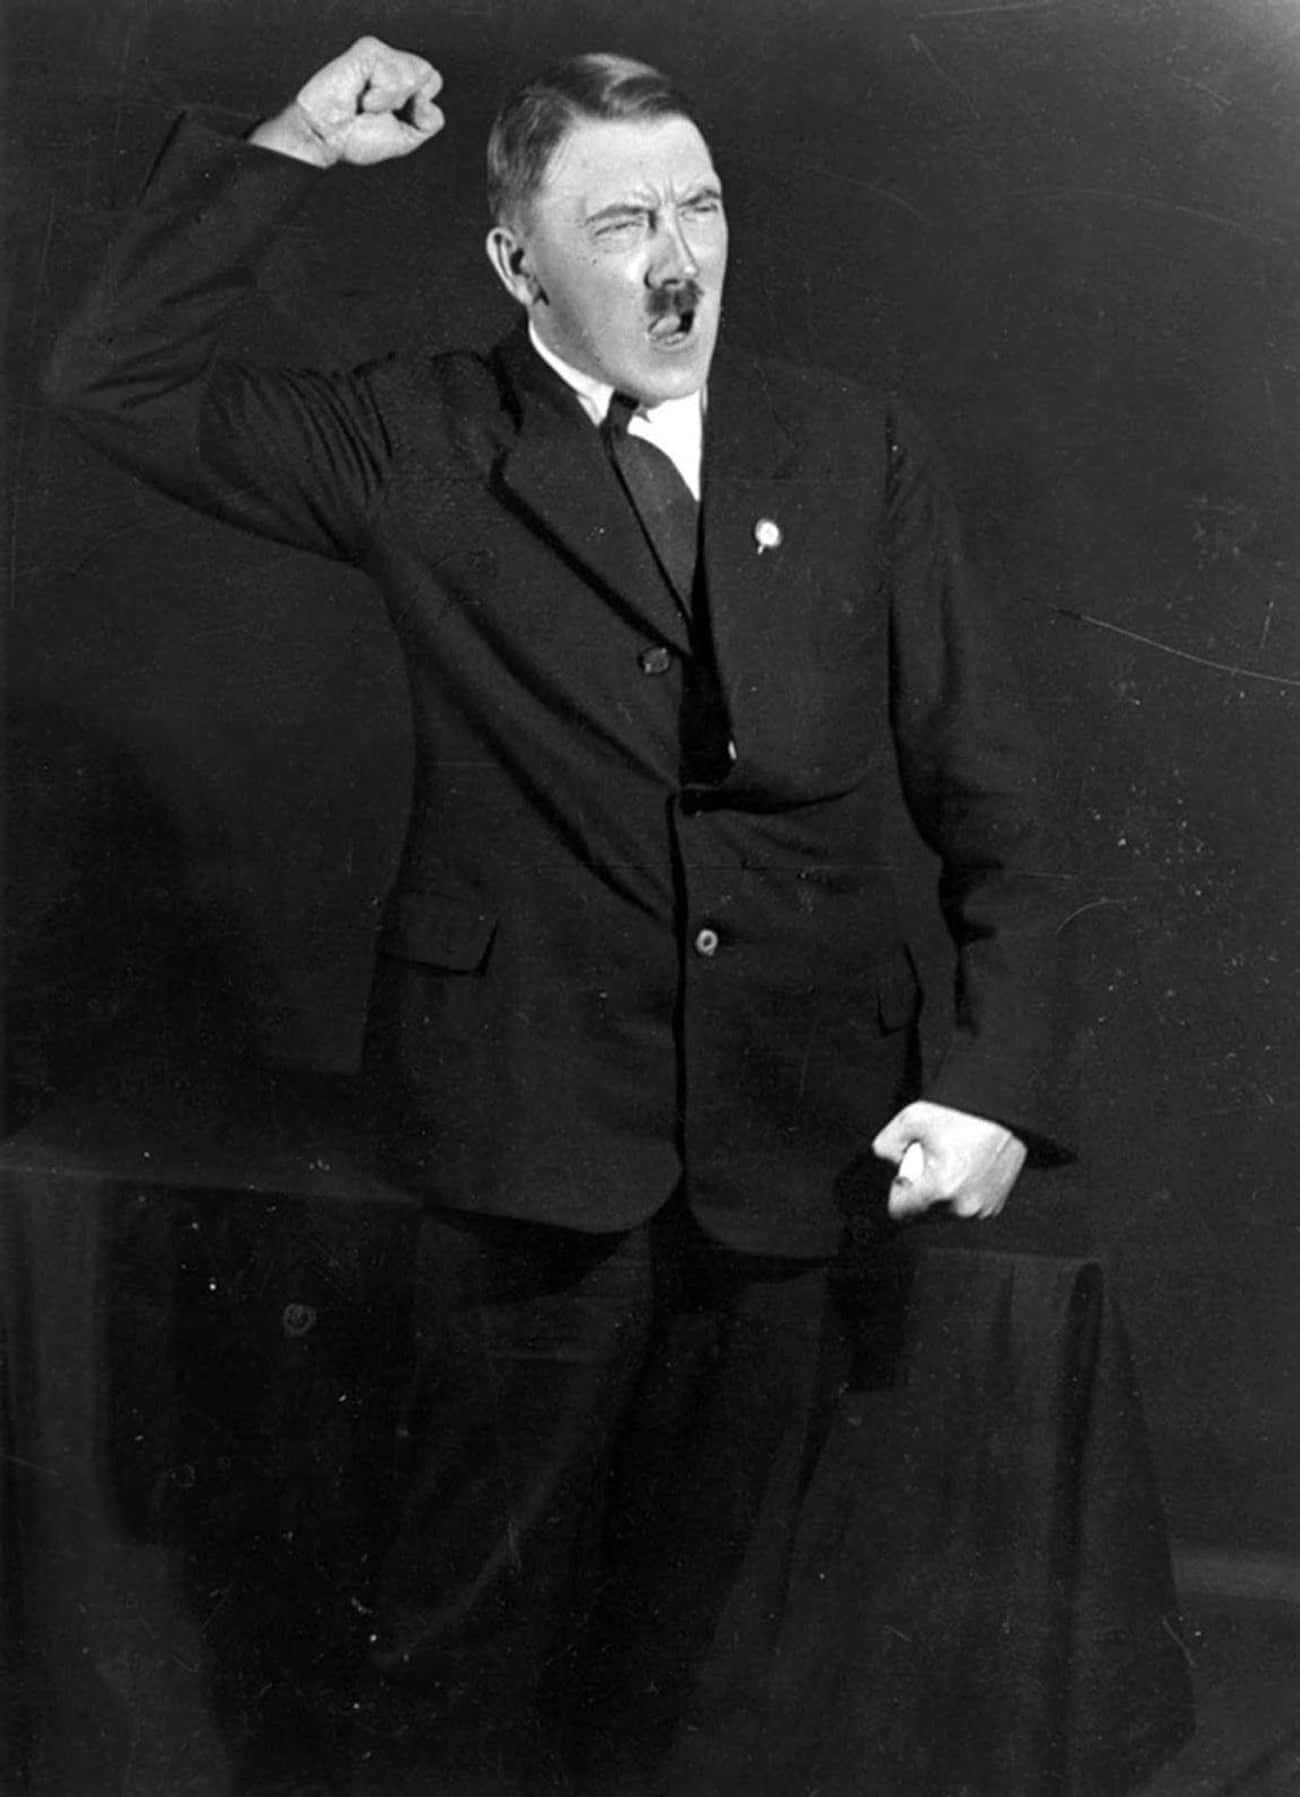 Hitler Didn’t Want Anyone To Know That He Wasn’t A Natural Orator